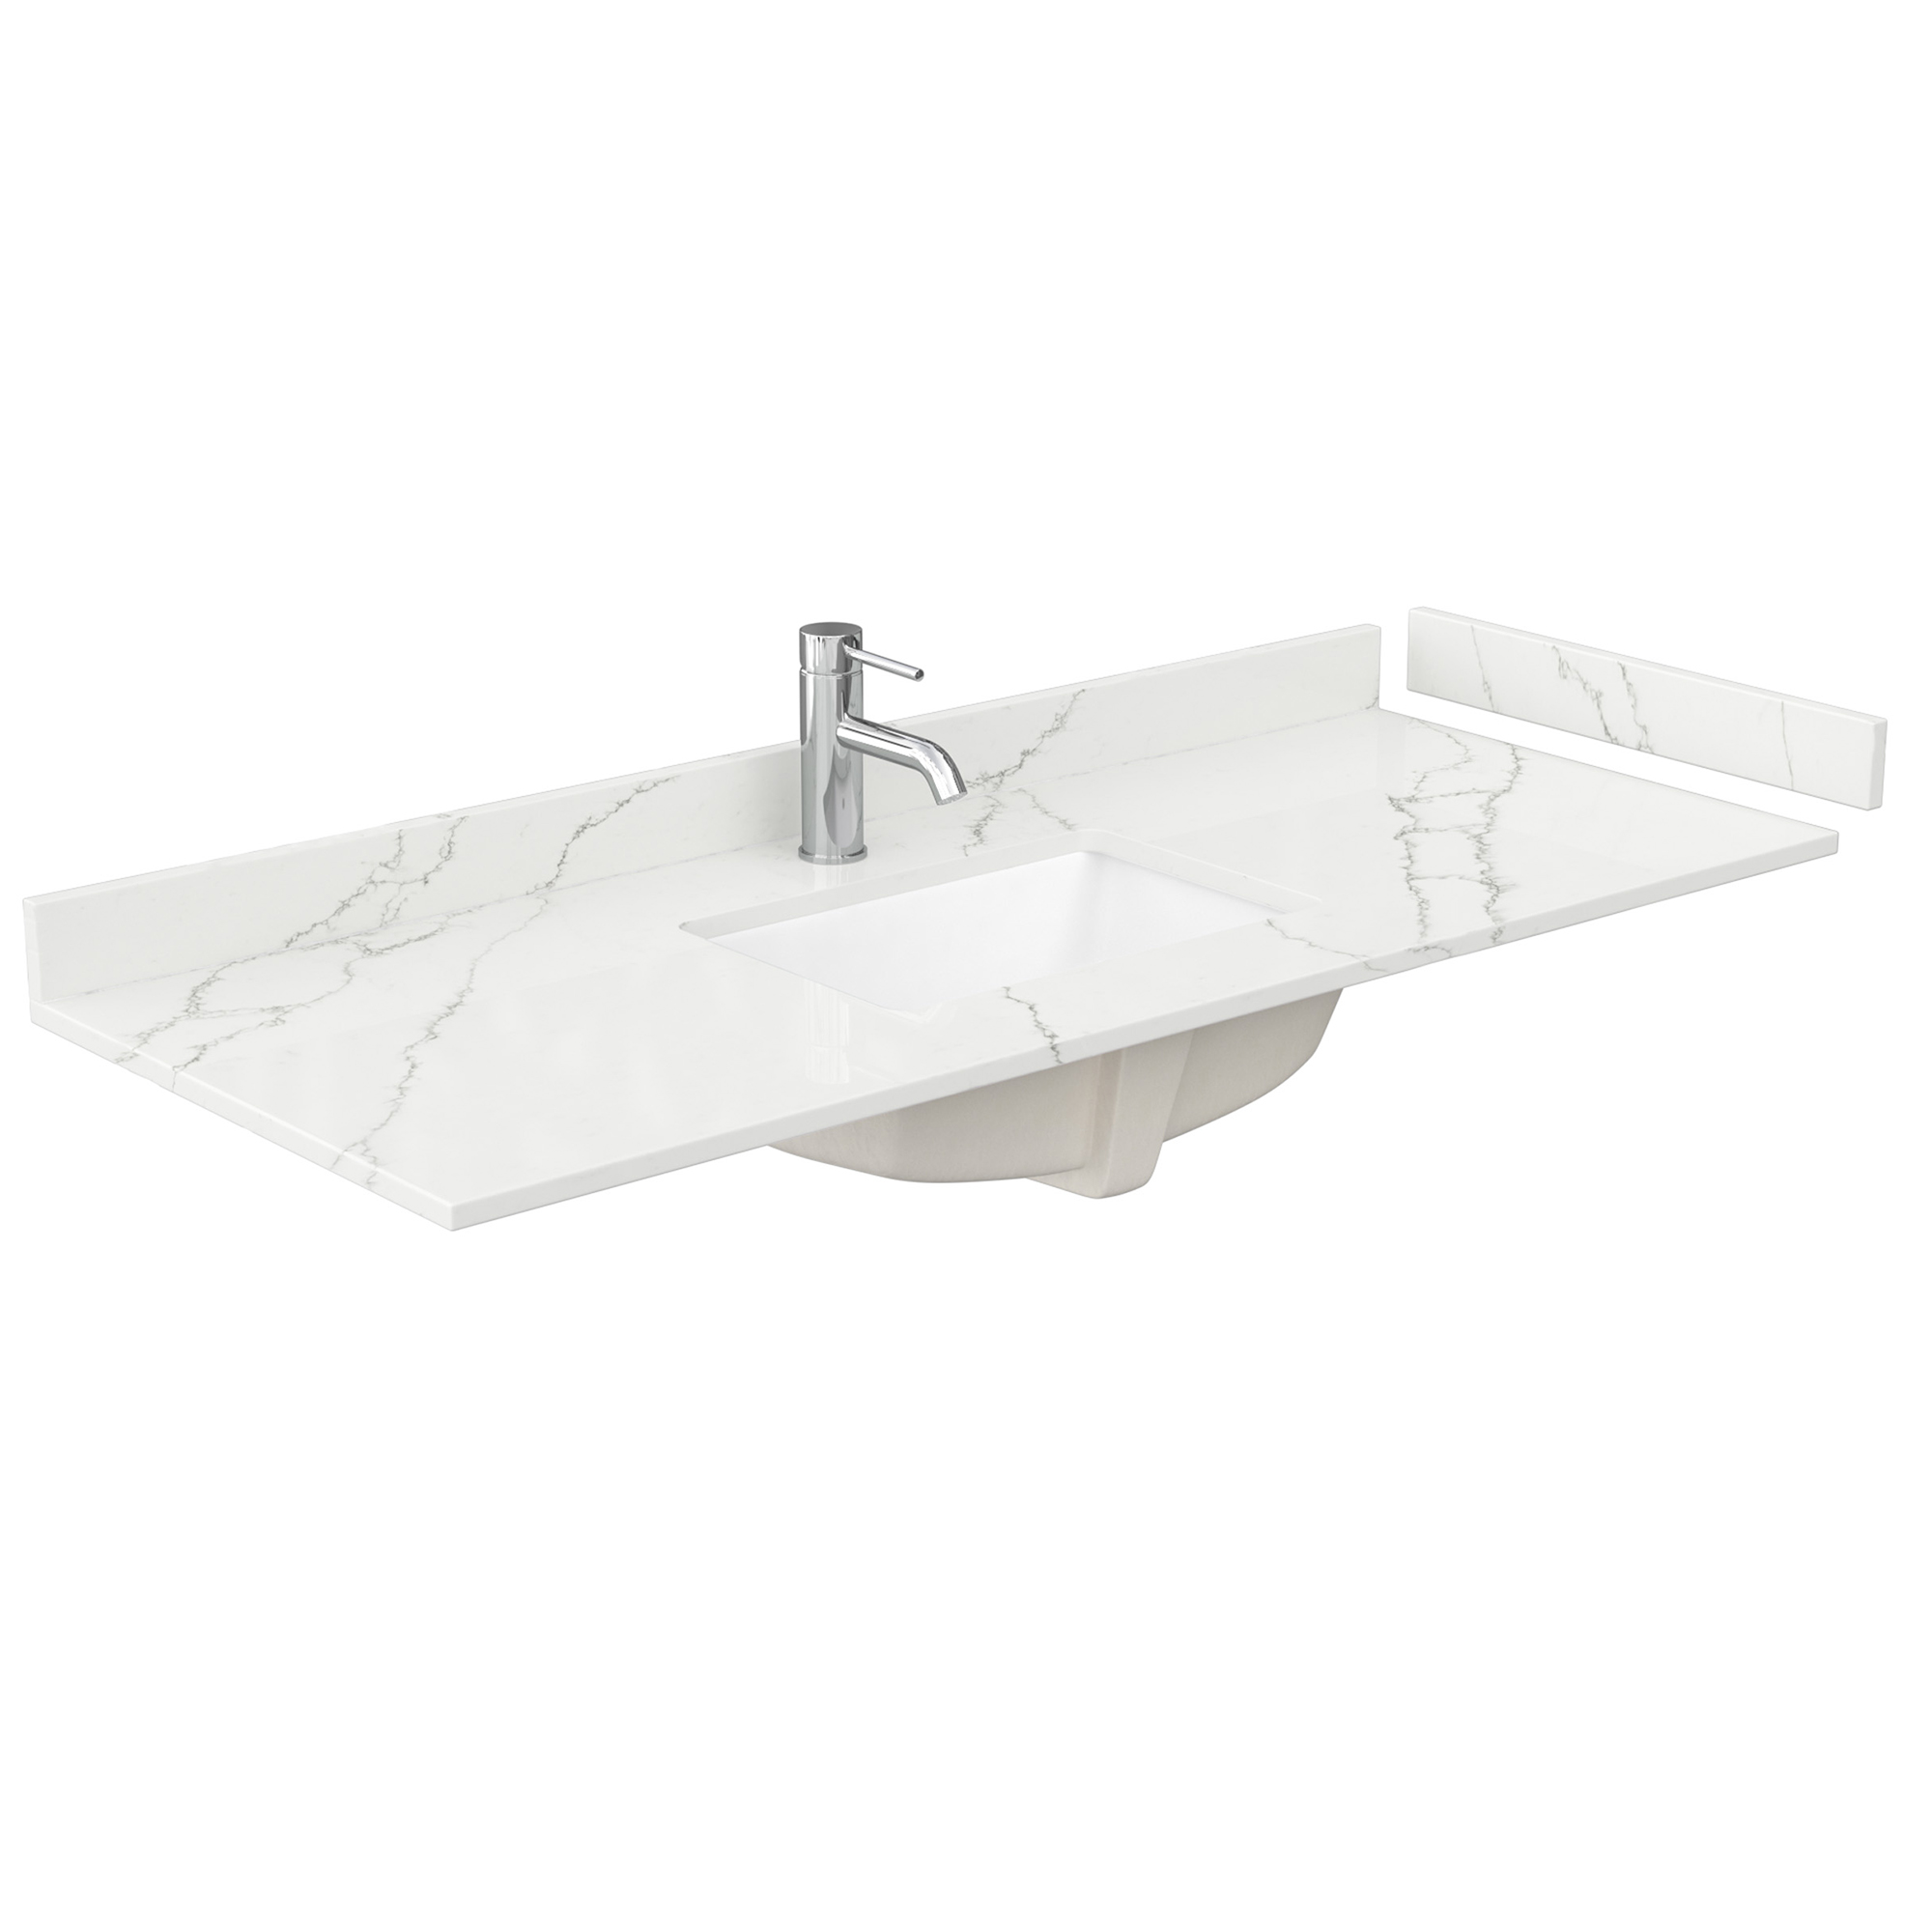 54" Single Countertop - Giotto Quartz (8066) with Undermount Square Sink (1-Hole) - Includes Backsplash and Sidesplash WCFQC154STOPUNSGT